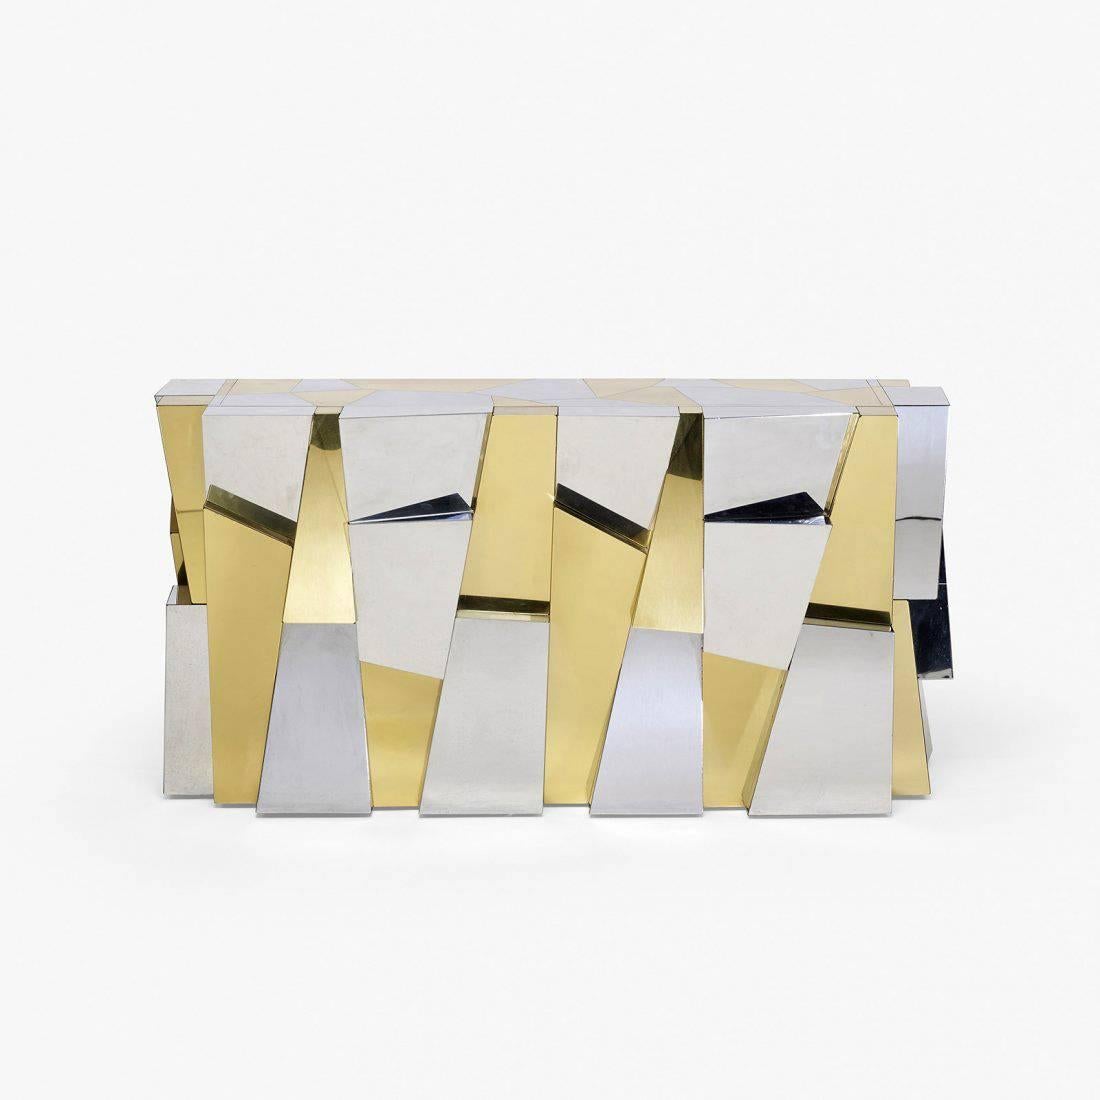 A fantastic console table in the rare faceted Cityscape form, originally ordered directly from The Directional Showroom in the Merchandise Mart Chicago and studio made by Paul Evans. Contrasting brass and chromed steel in dramatic sculptural form.